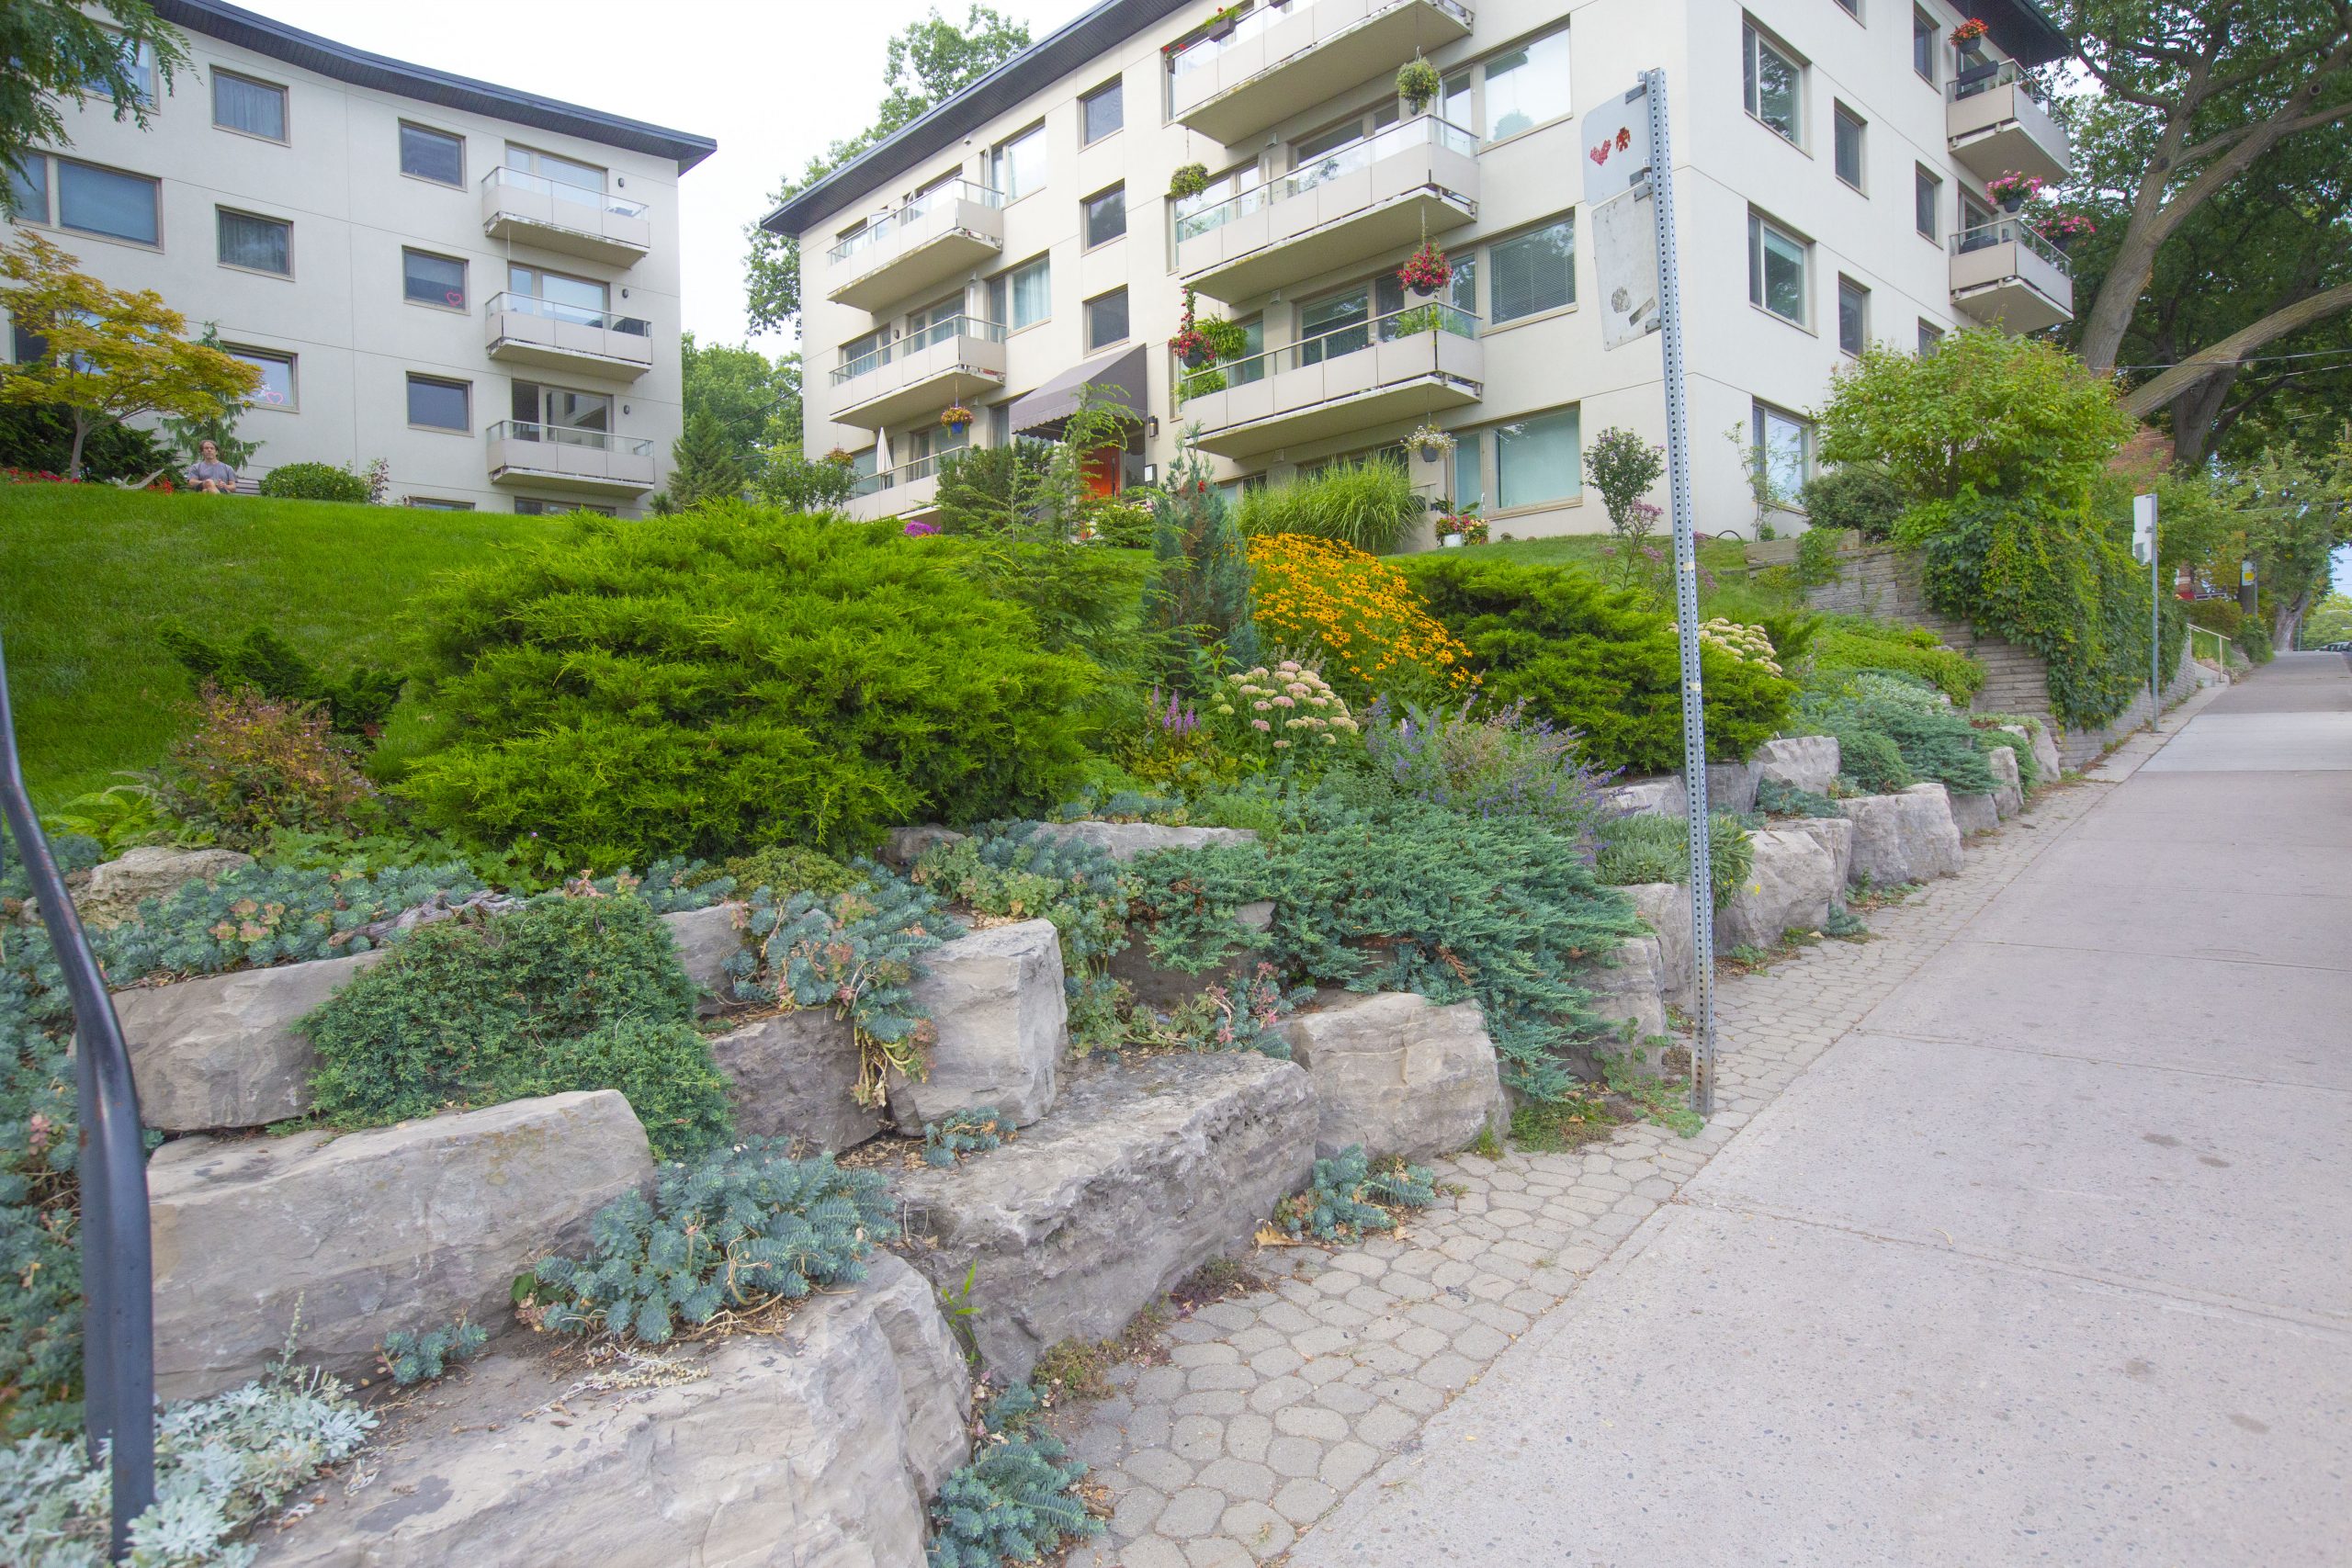 A garden off to the left of a side walk that is filled with rocks, green and yellow plants. There are apartment buildings in the background.